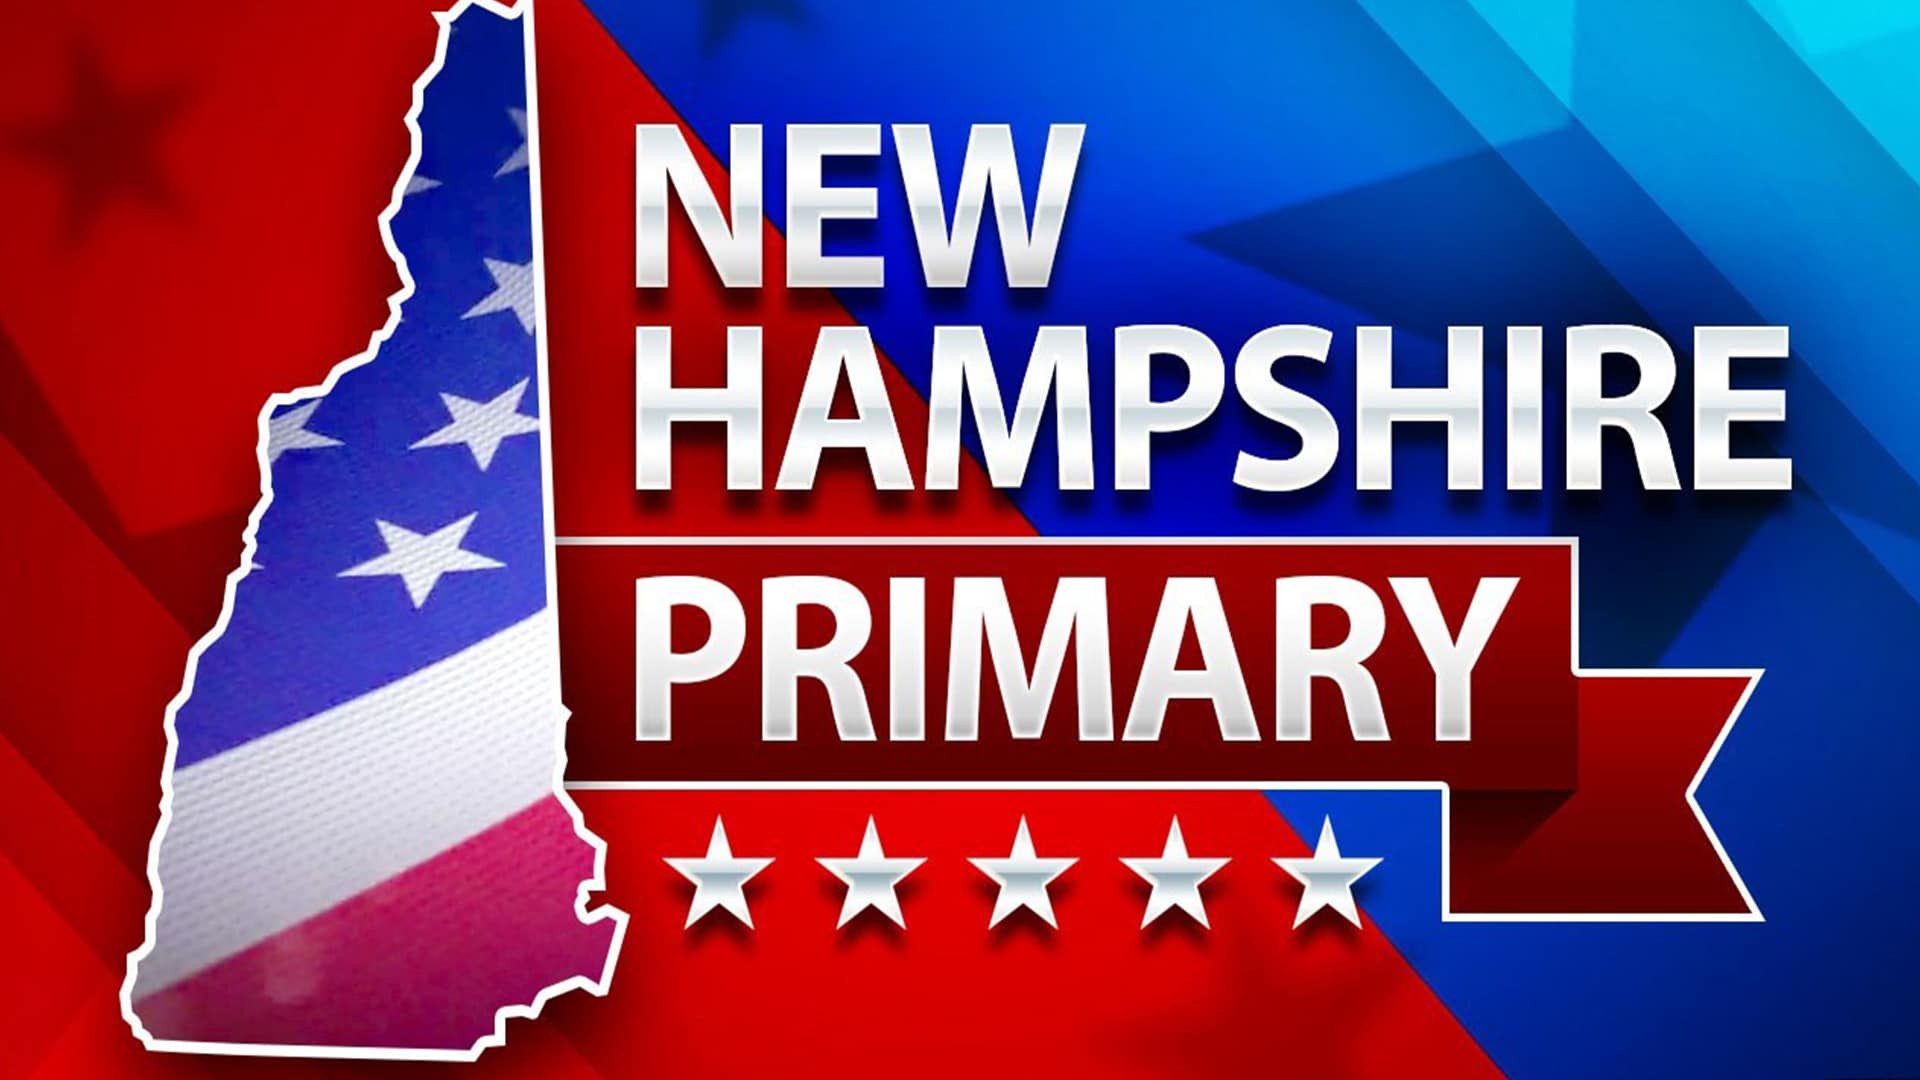 Wednesday-CRUSHED: Trump Rolls New Hampshire While The Socialist and Sodomite Portend #Demoncrat Defeat In November